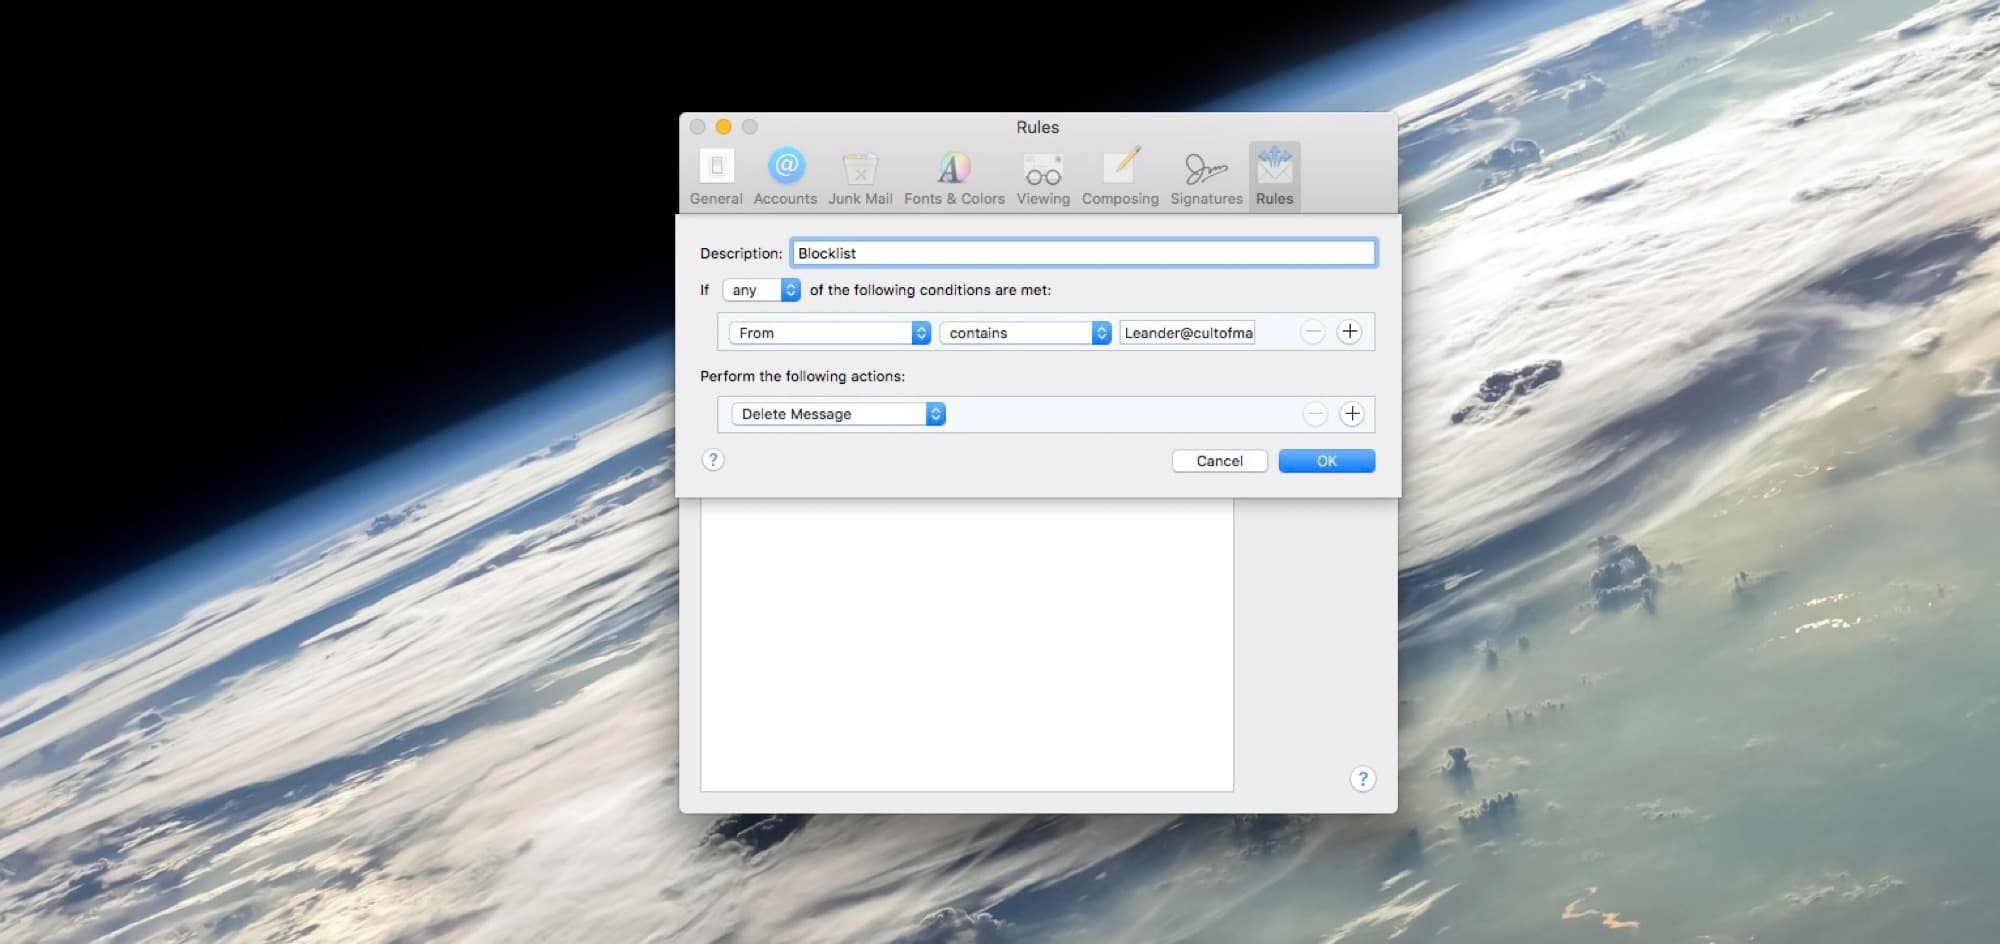 Sorry, Leander! This Mac Mail rule lets you block all emails from a particular sender